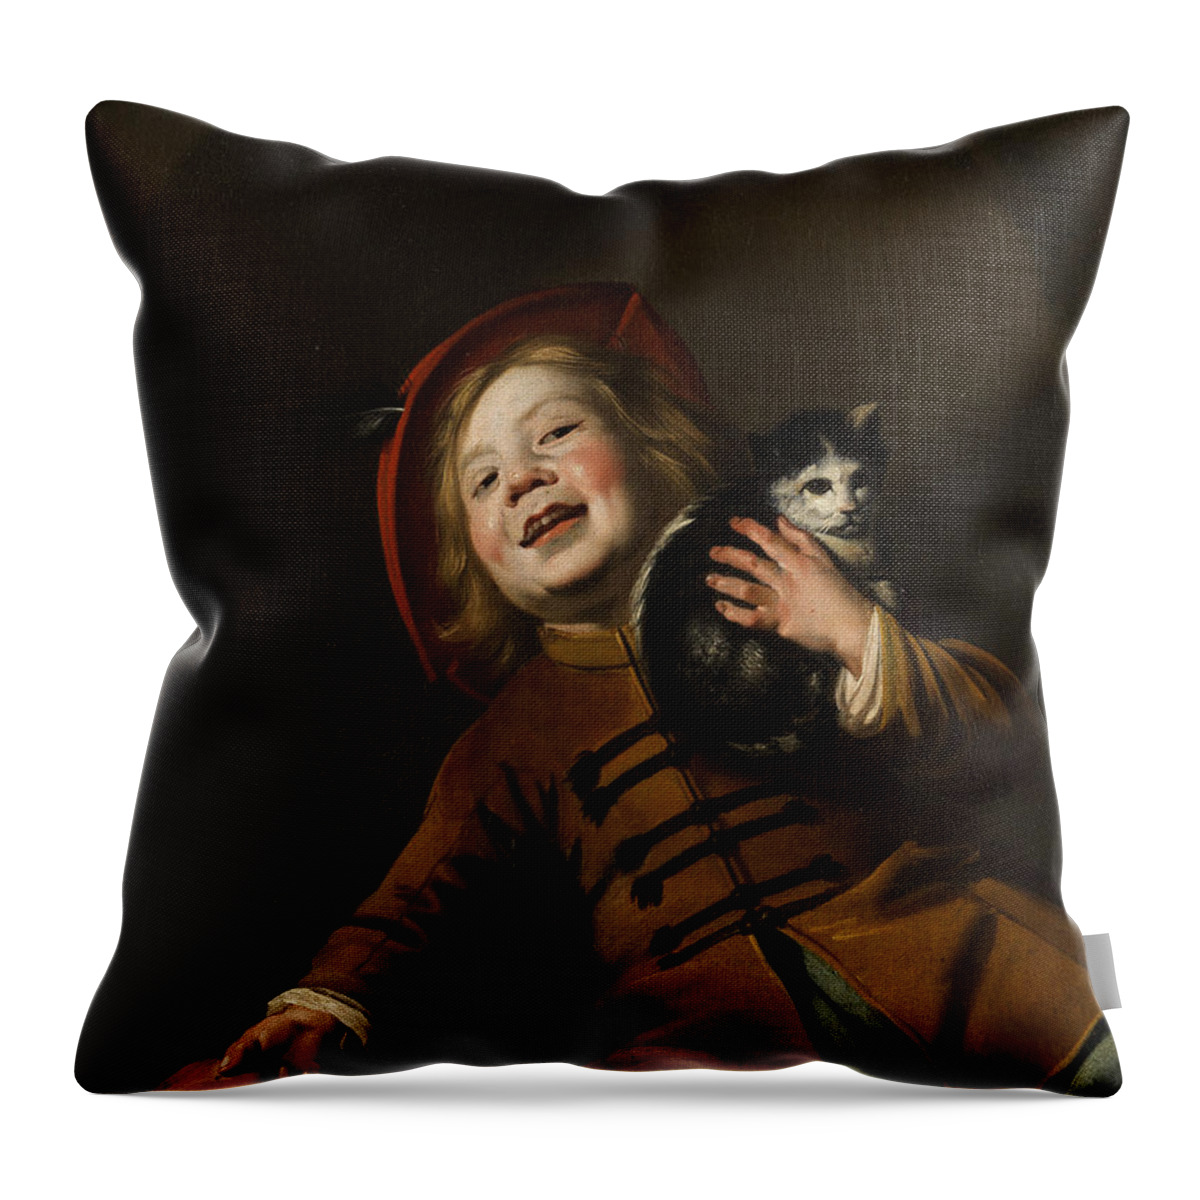 Boy With A Cat Throw Pillow featuring the painting Boy with a cat by Judith Leyster